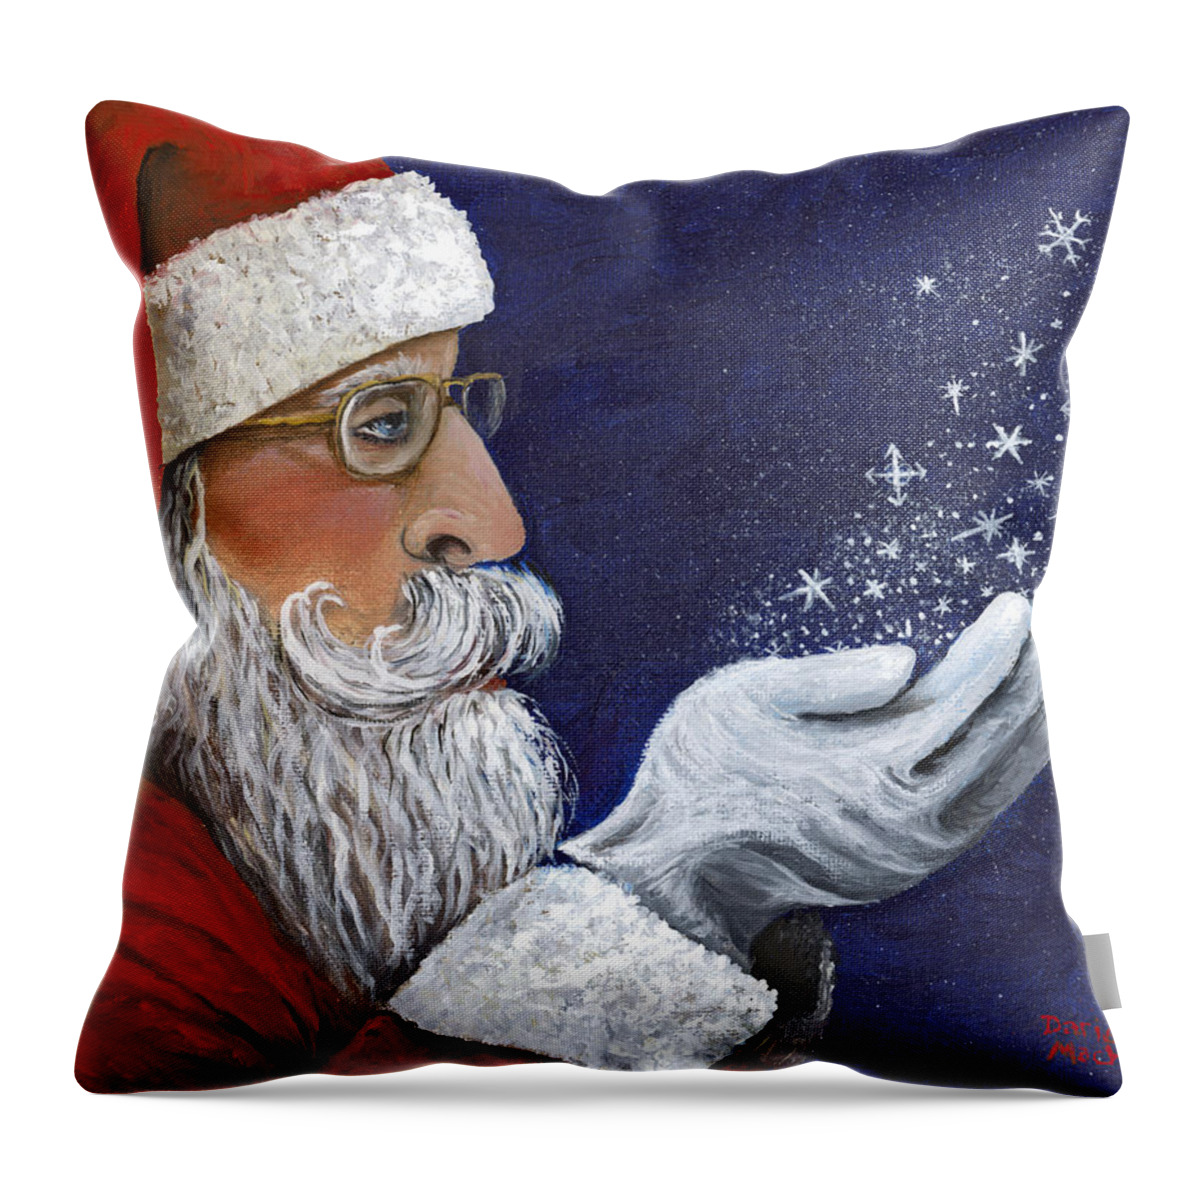 Person Throw Pillow featuring the painting Christmas Wish by Darice Machel McGuire